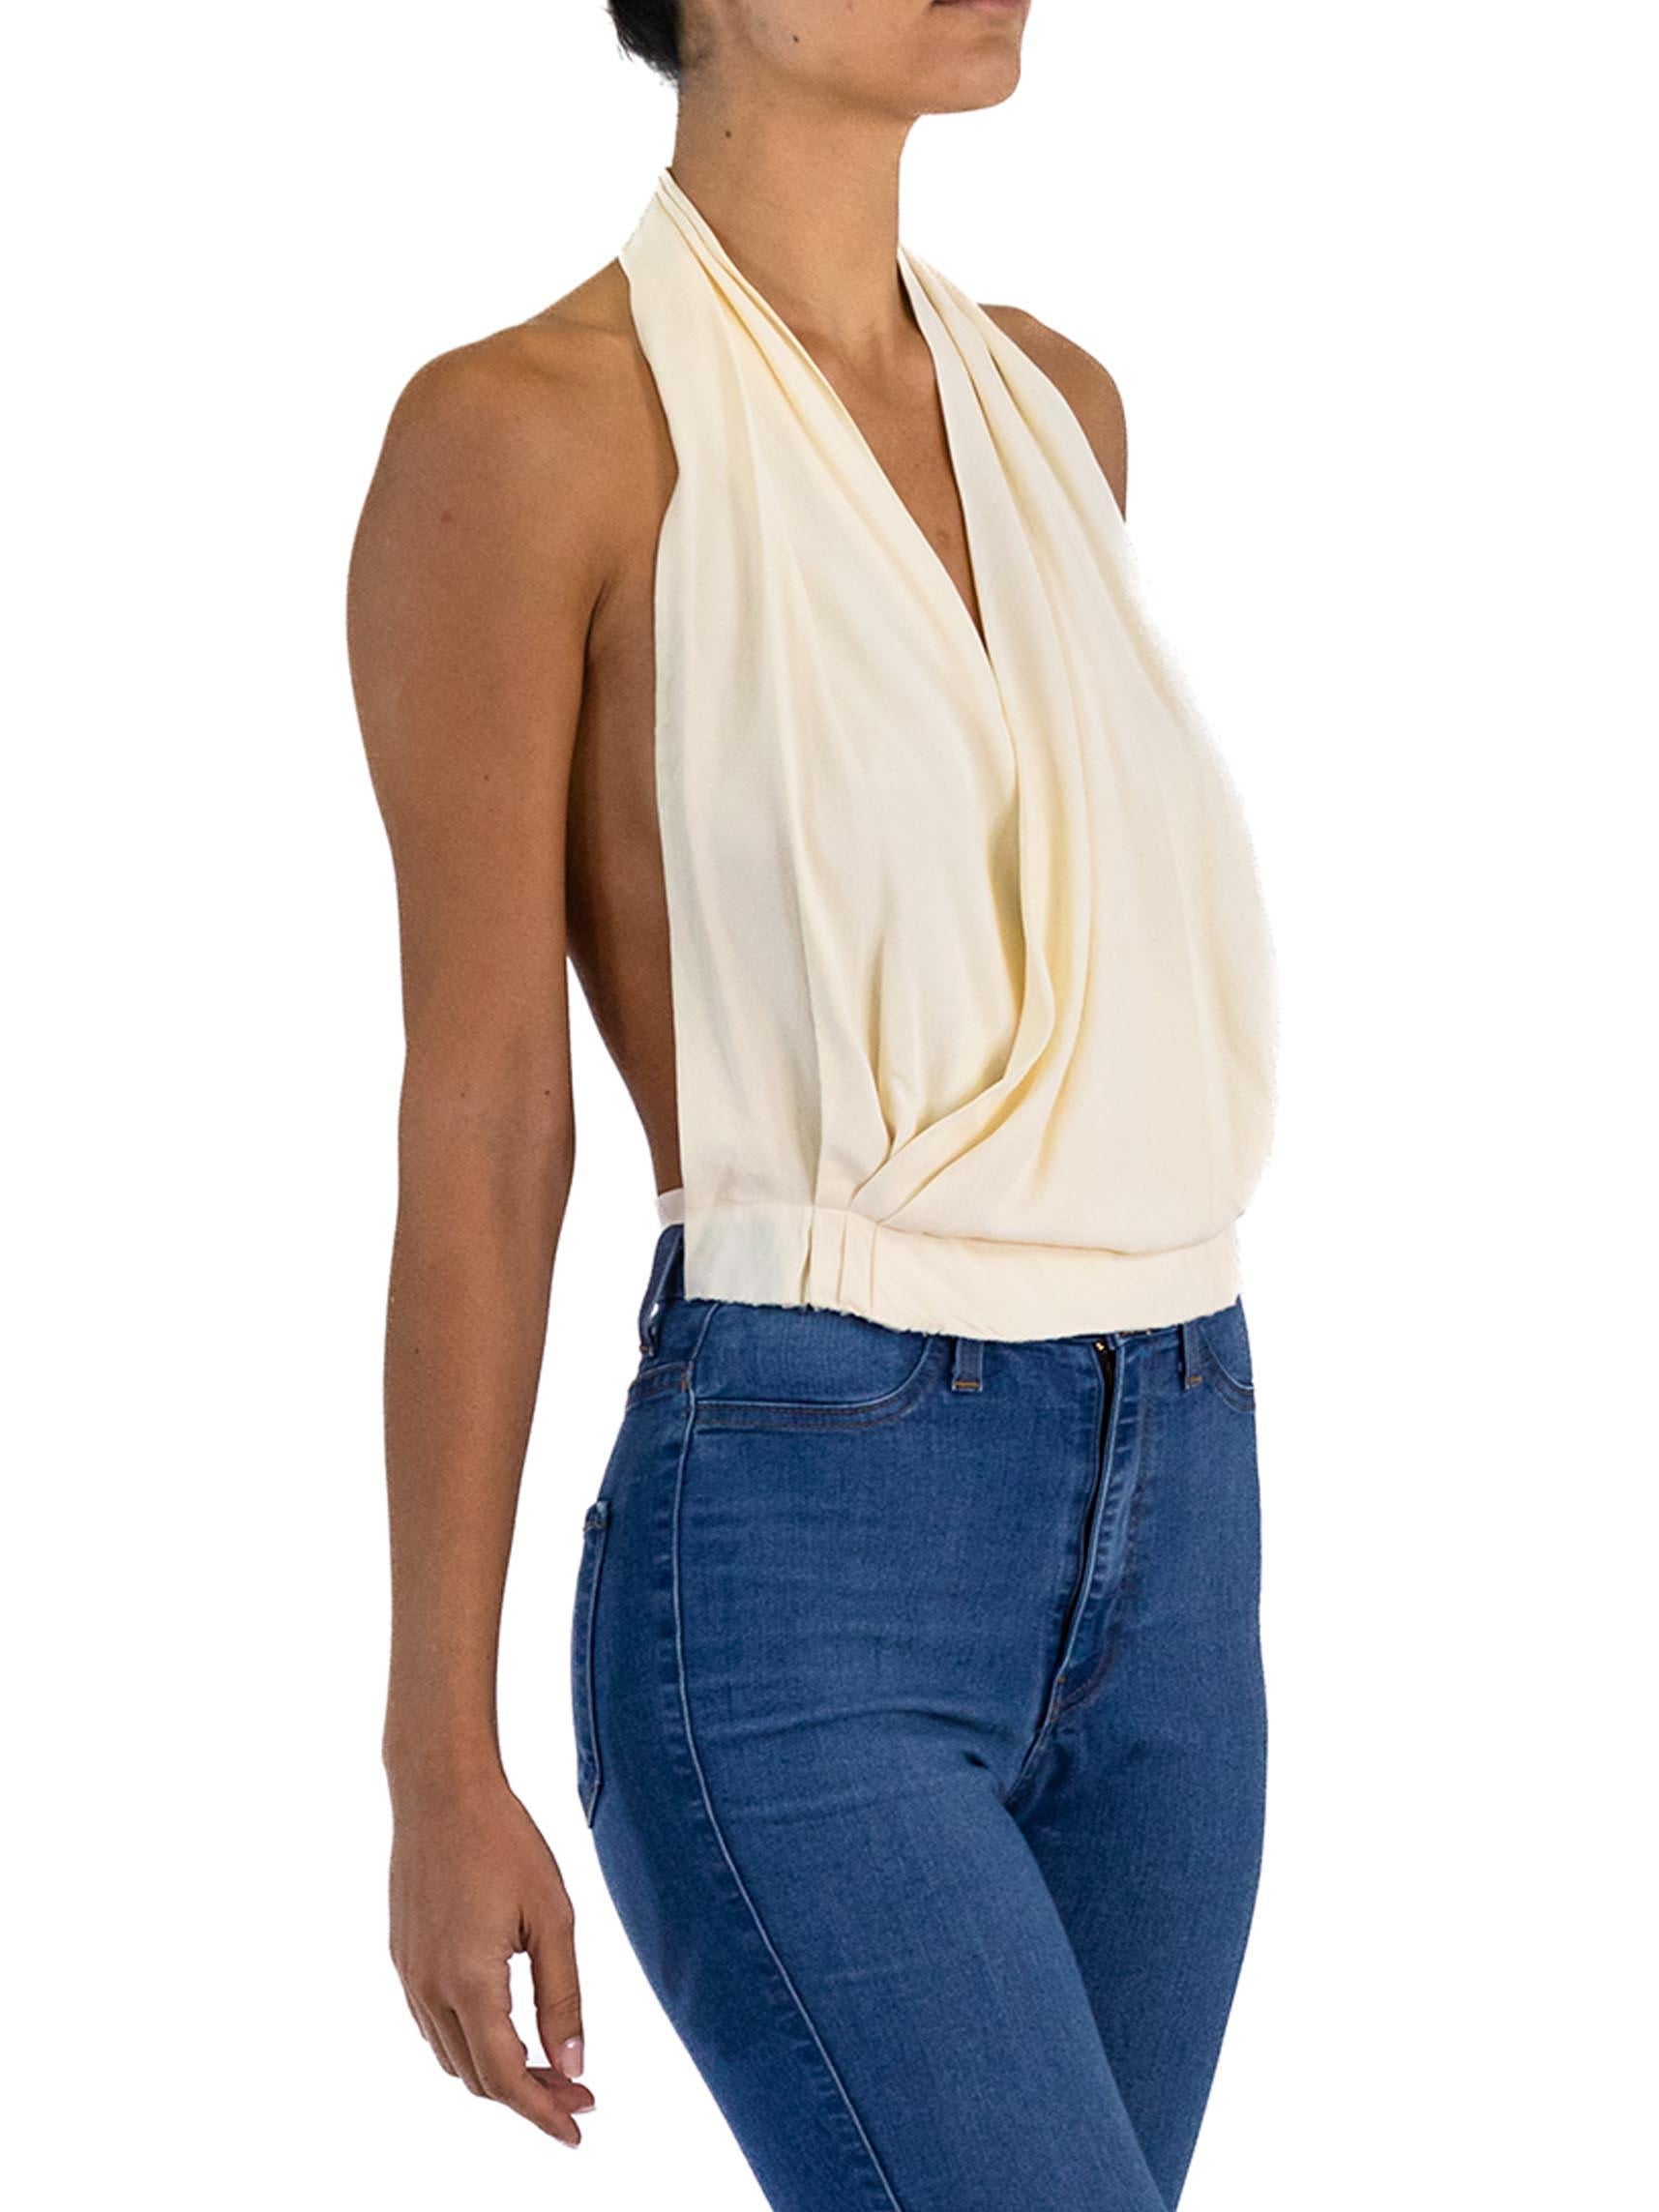 1950S SAKS Cream Rayon Crepe Halter Top In Excellent Condition For Sale In New York, NY